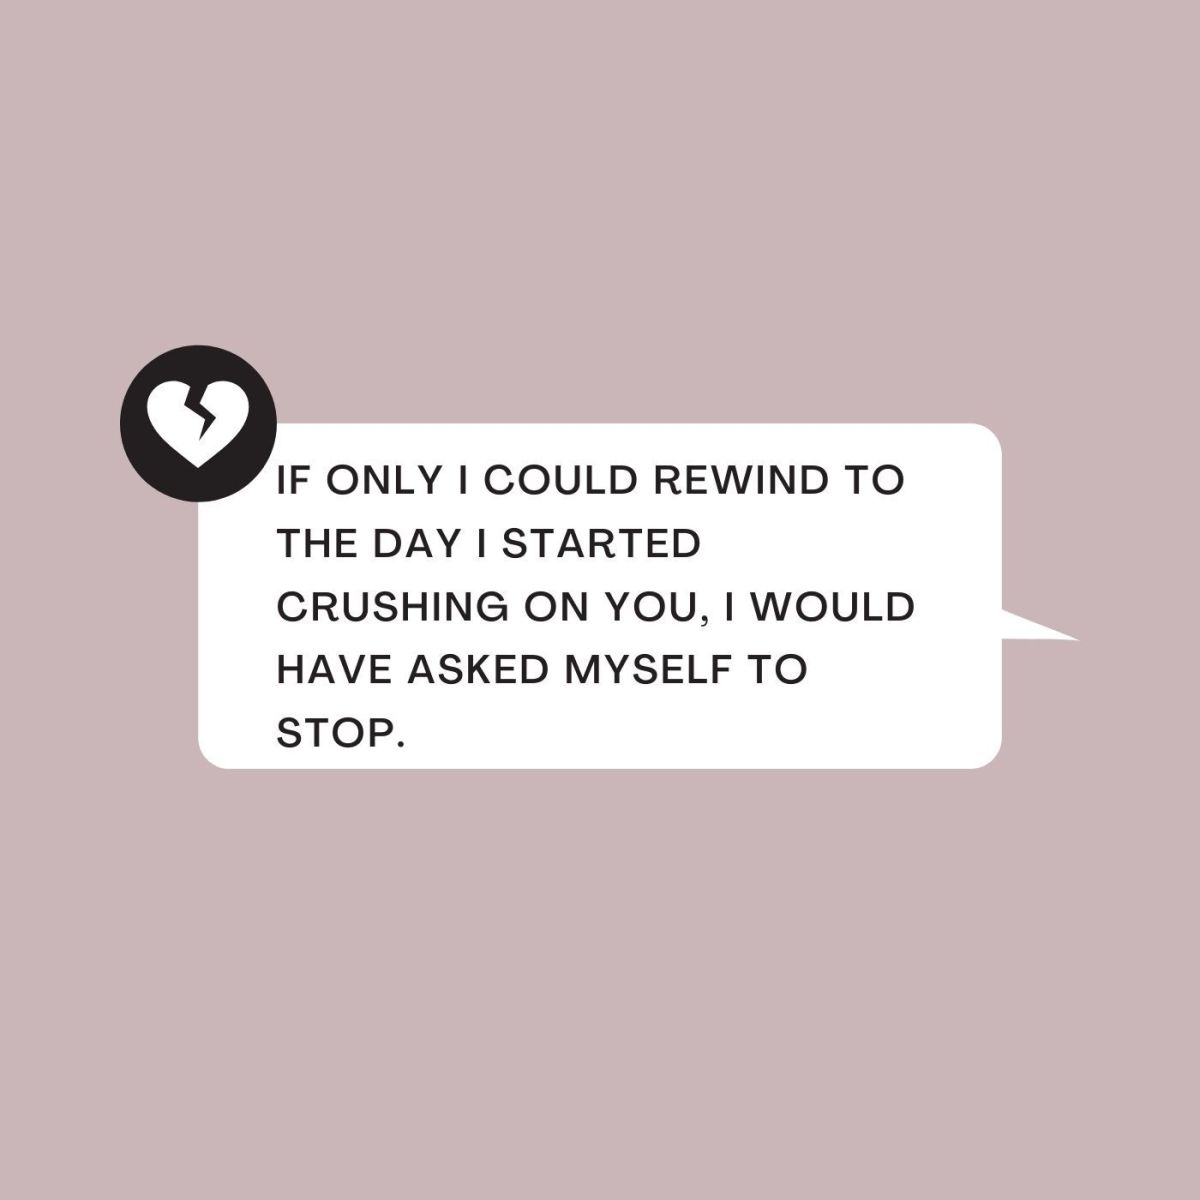 Sad, Inspirational, Motivational, Angry, and Heartfelt Breakup Quotes -  PairedLife